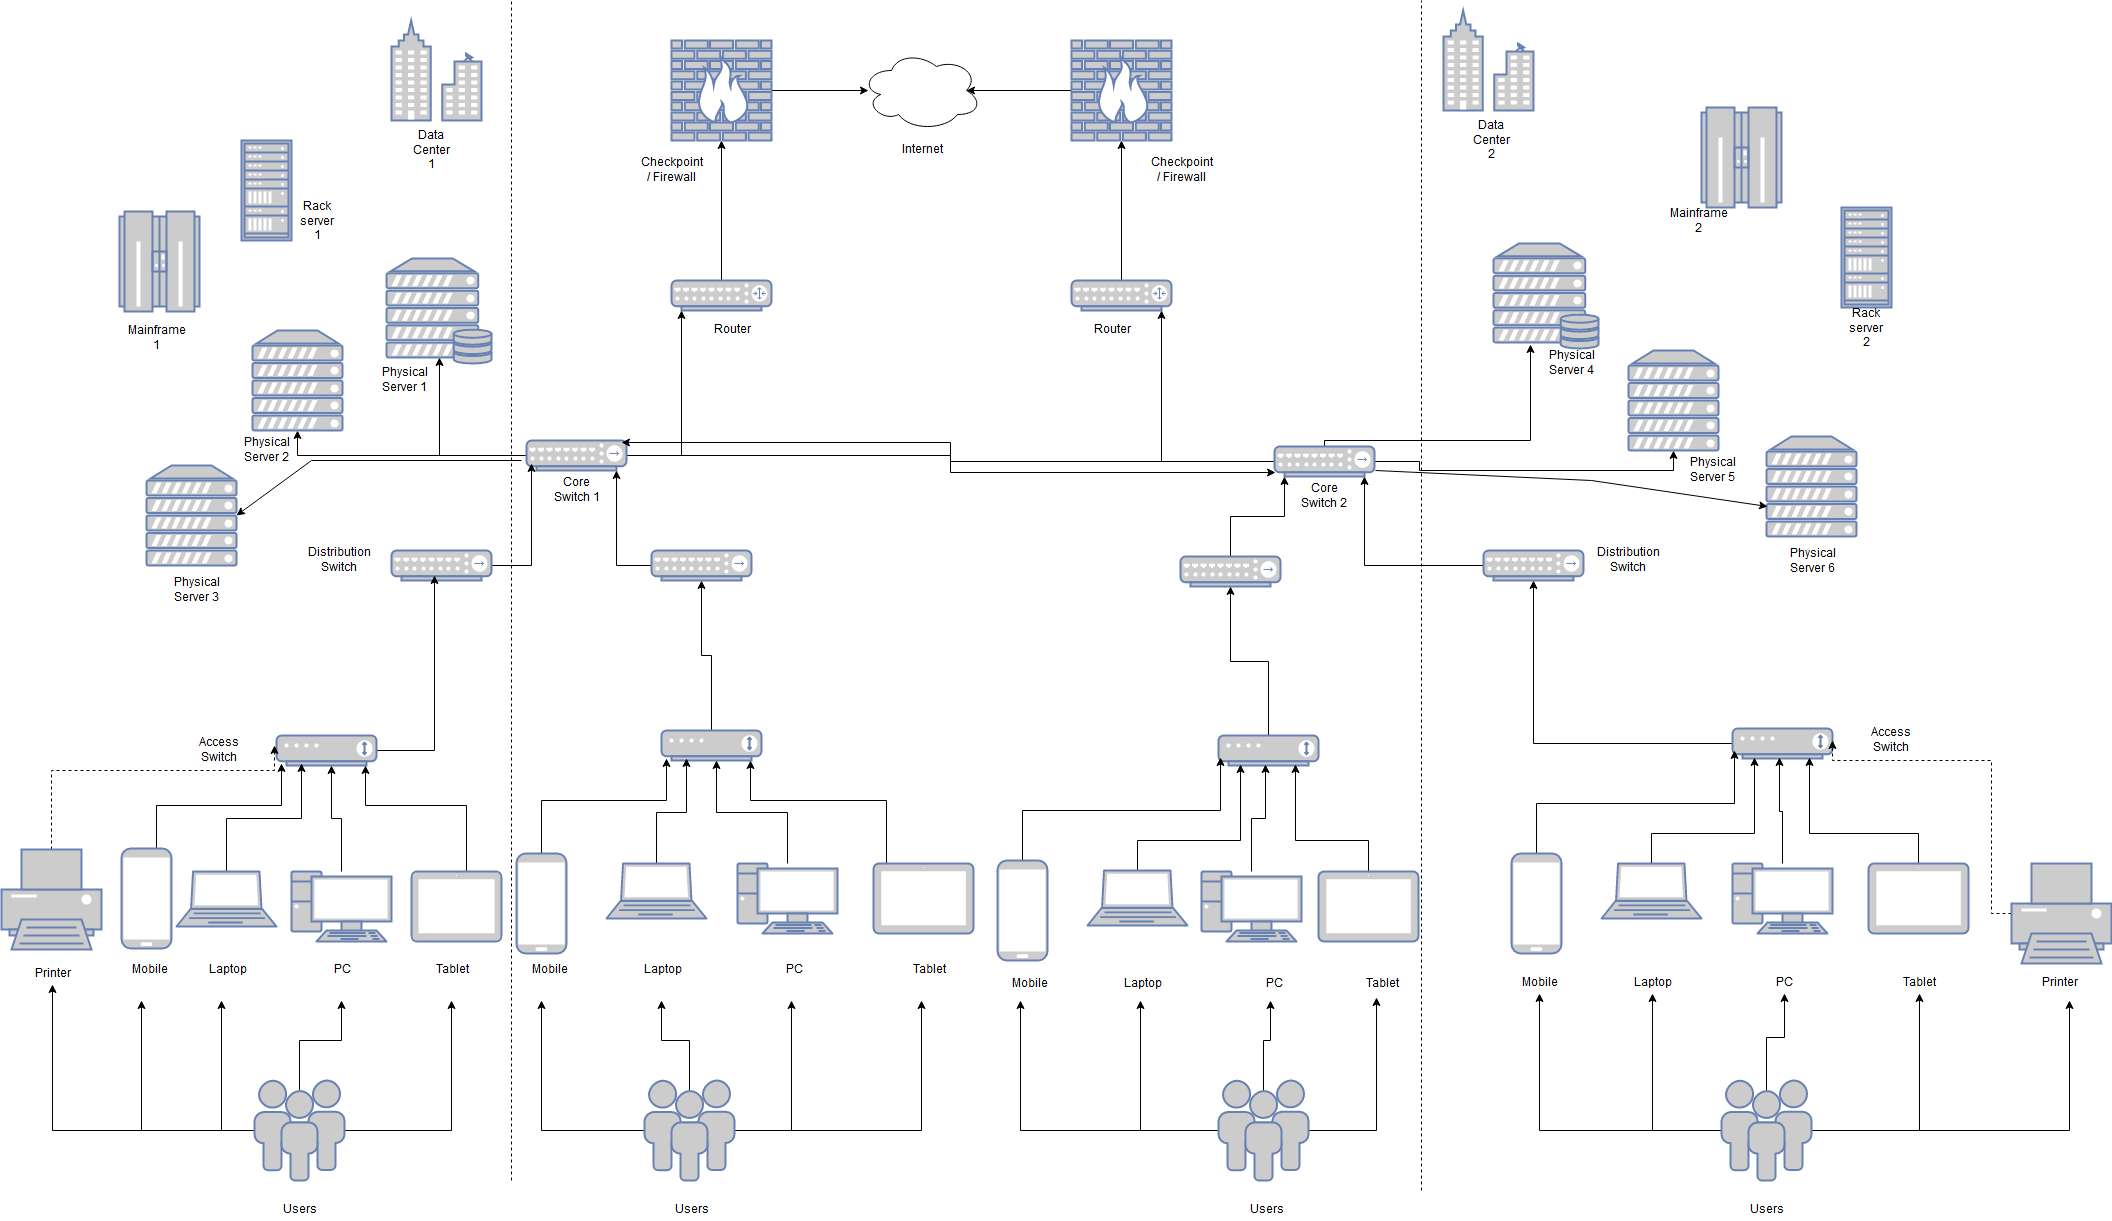 solarwinds network topology mapper not showing switches